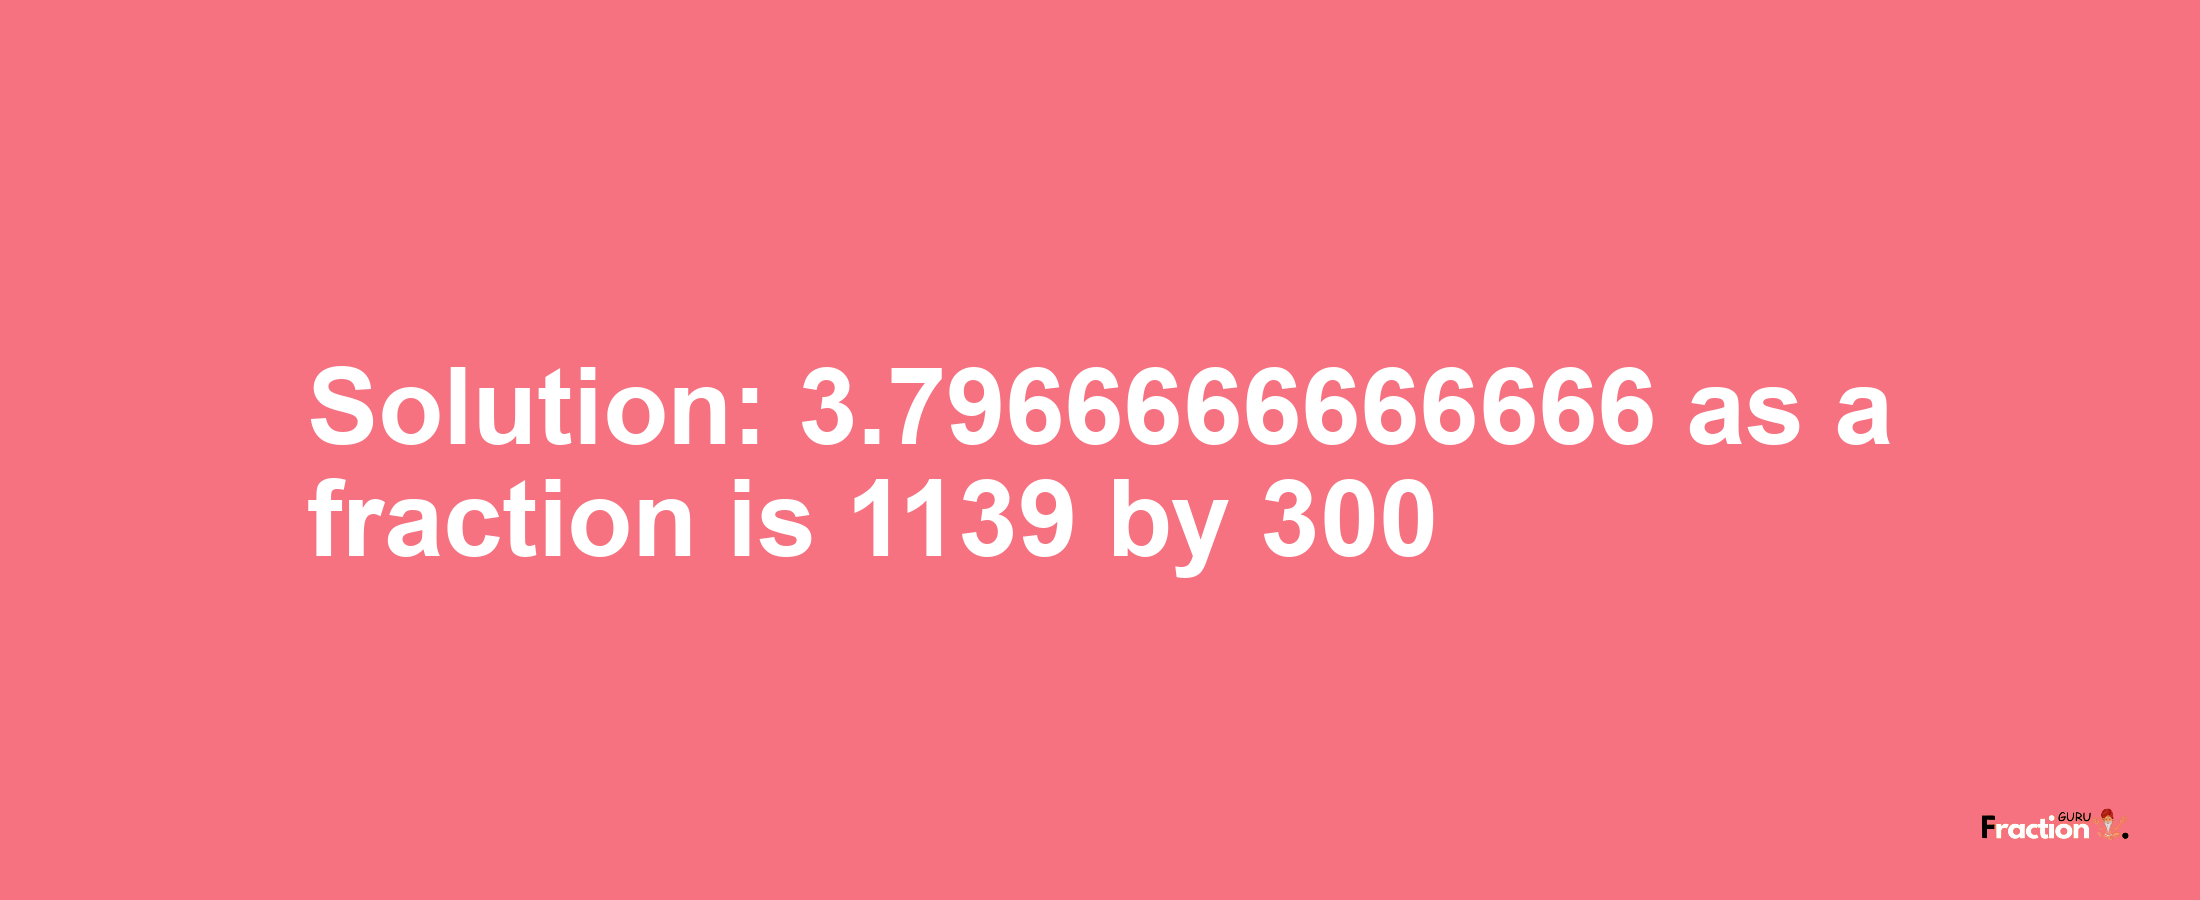 Solution:3.7966666666666 as a fraction is 1139/300